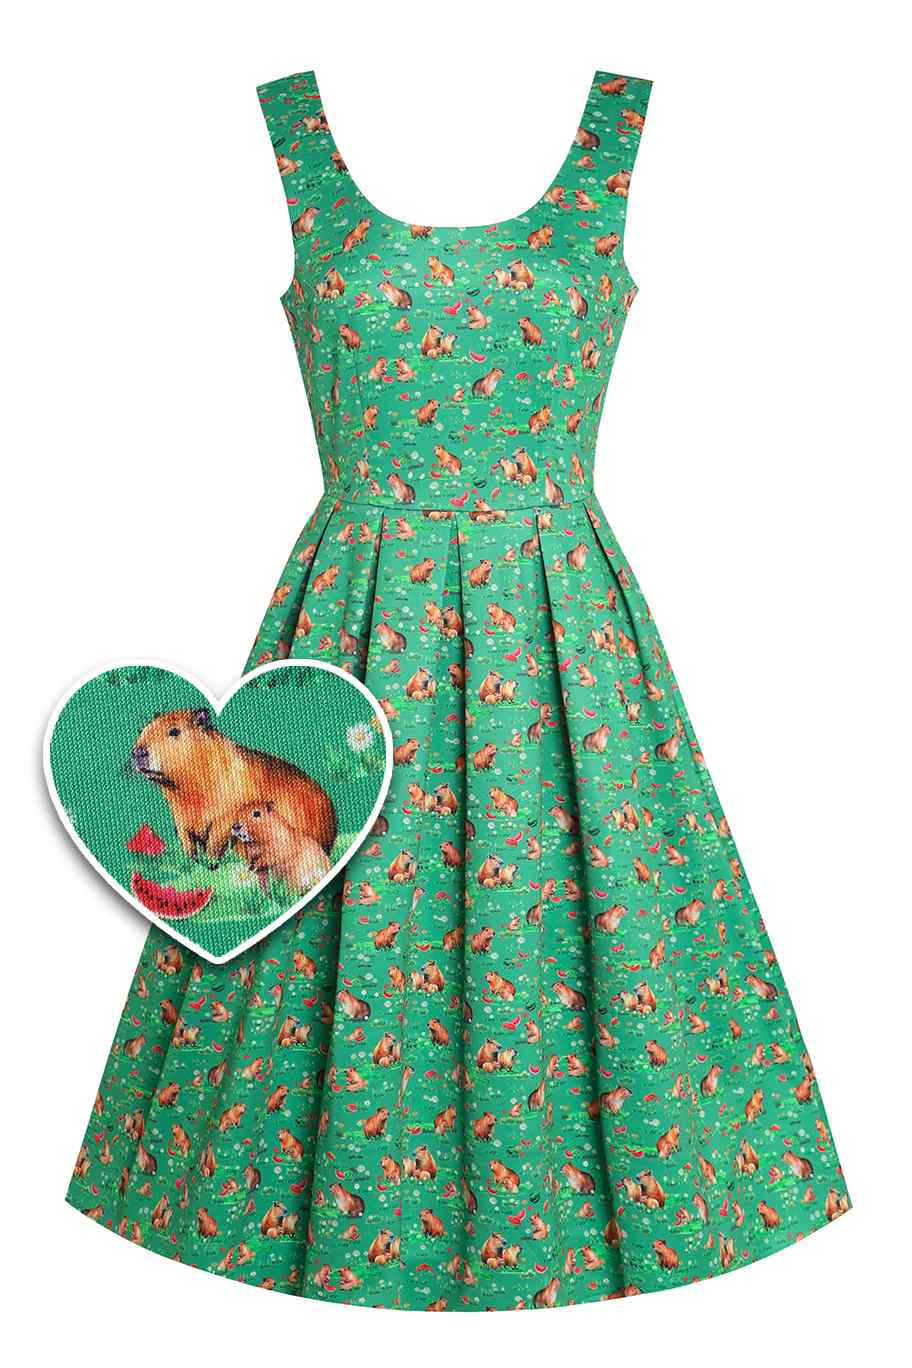 Front view of Green Flared Dress in Capybara Watermelon Print